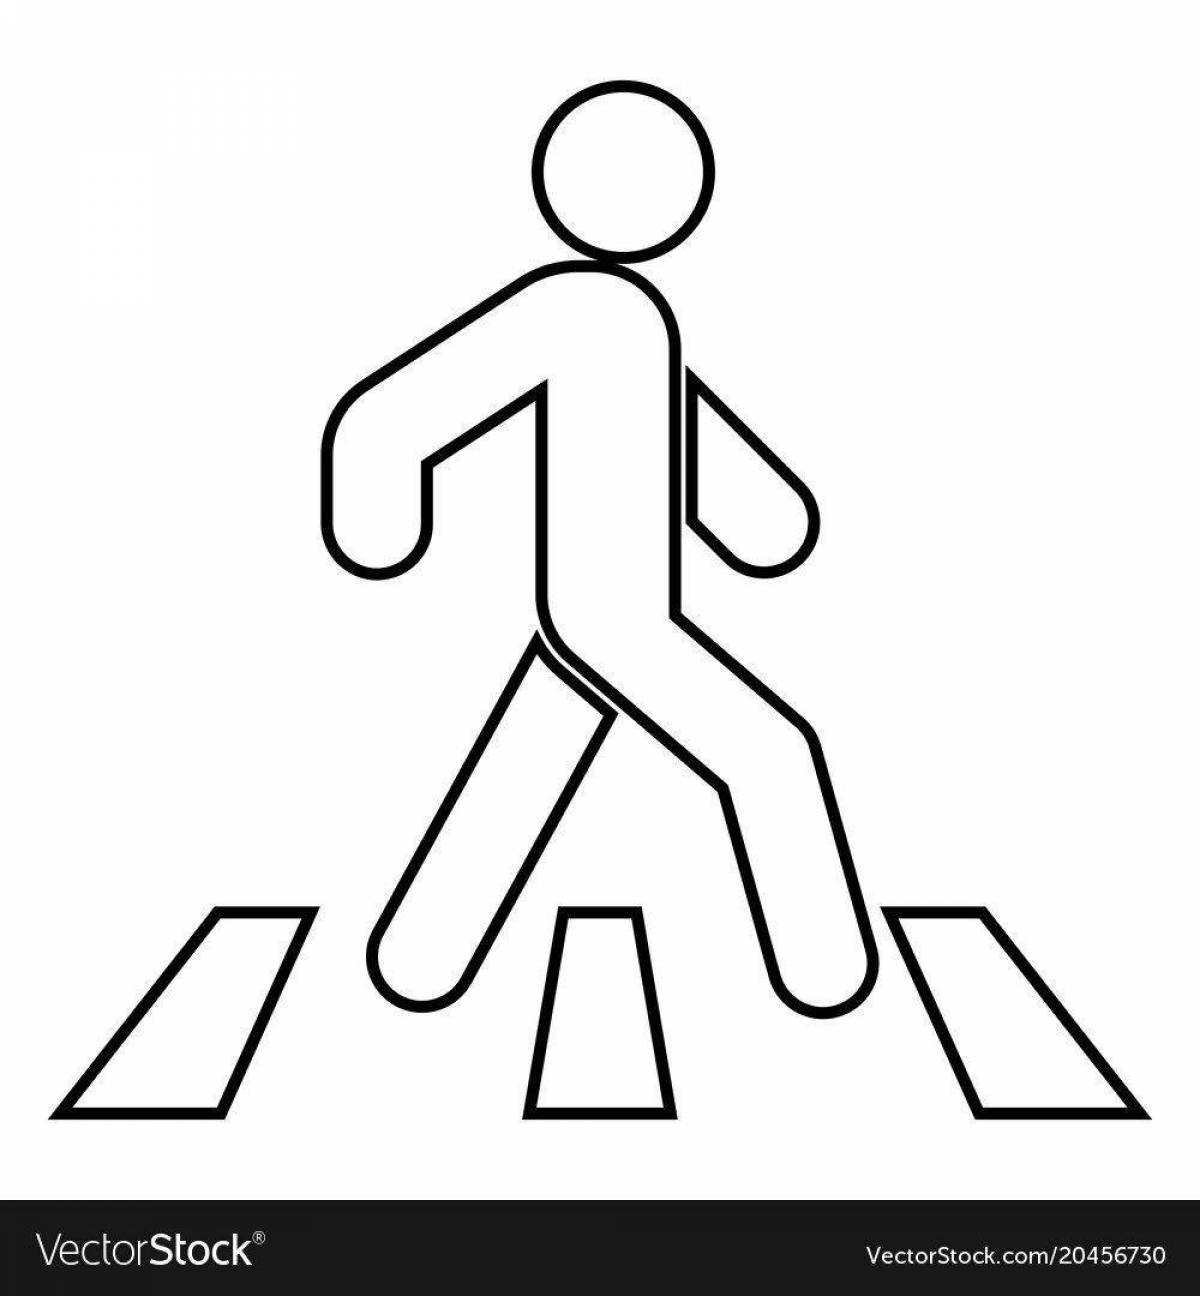 Coloring page animated crosswalk sign